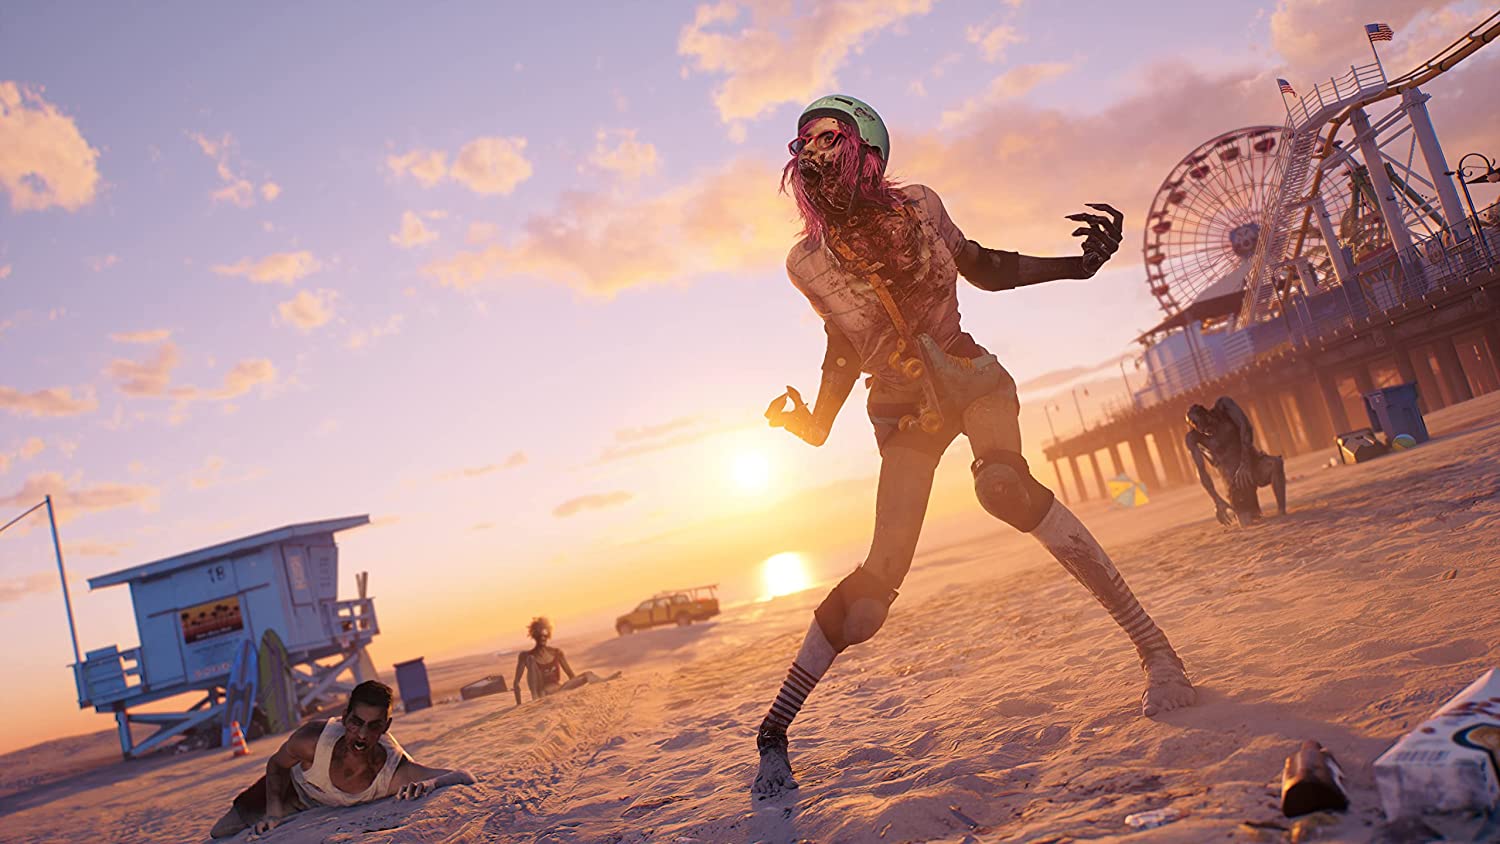 Dead Island 2 is an upcoming first-person action horror sequel to the 2011 original.